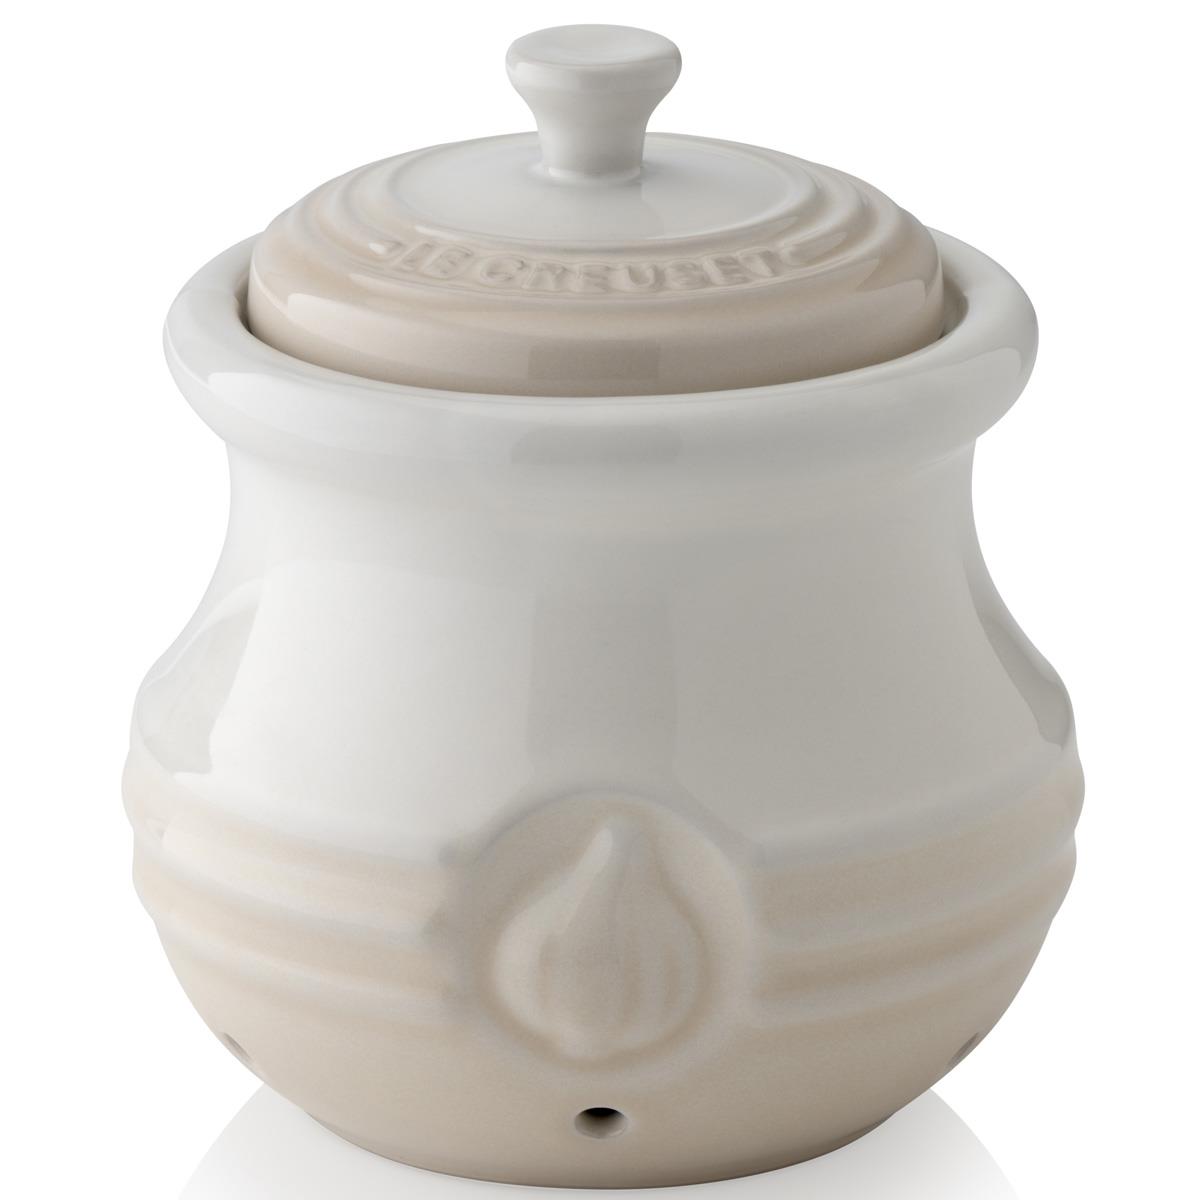 Is the le creuset garlic keeper dishwasher-friendly?